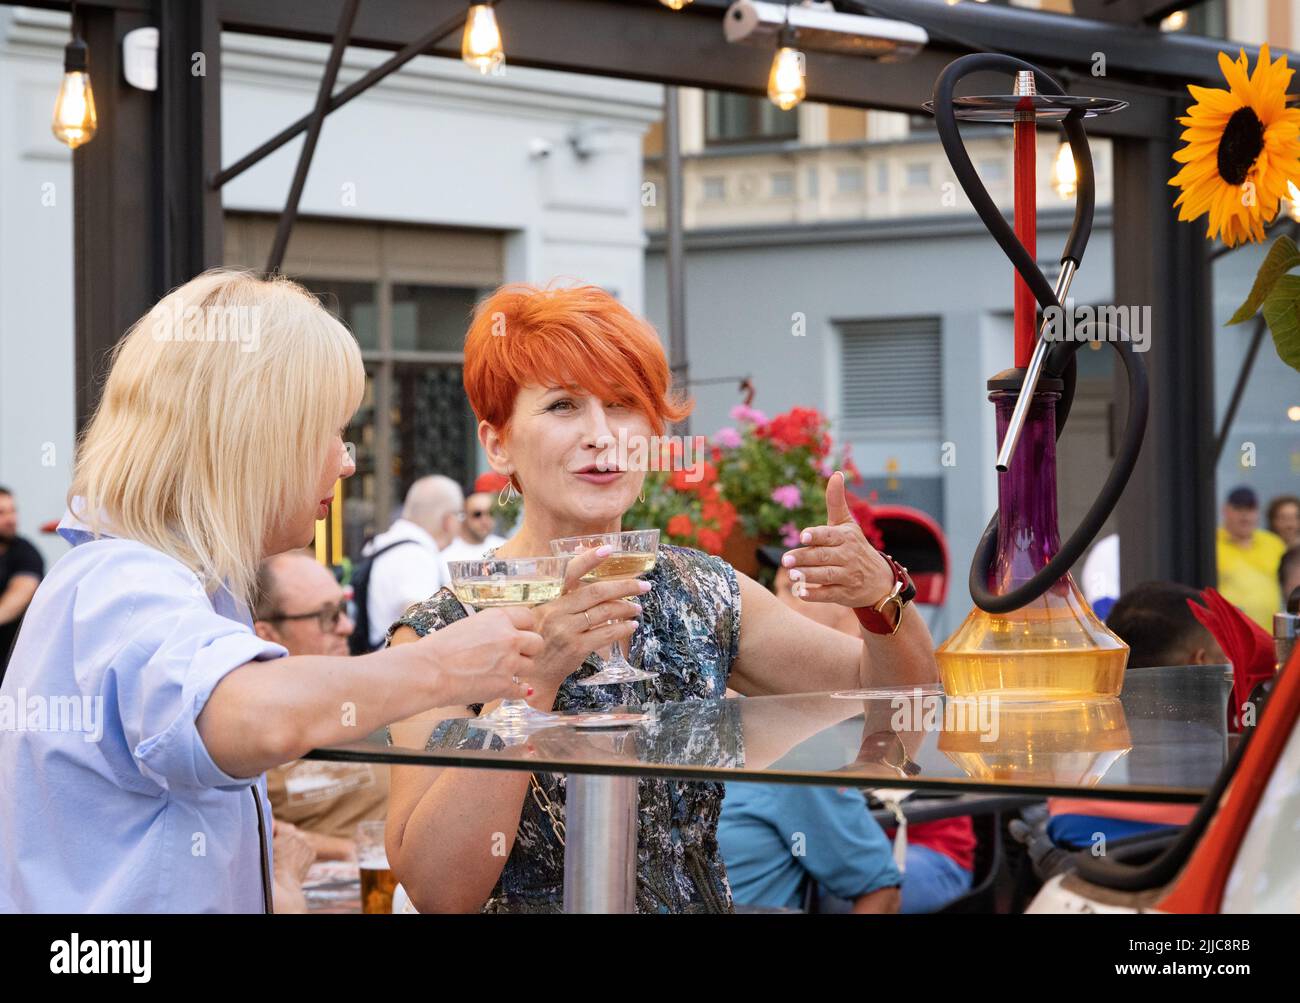 Wine friends; Two women drinking wine on a night out in a bar, Riga, Lithuania Europe. European lifestyle Stock Photo